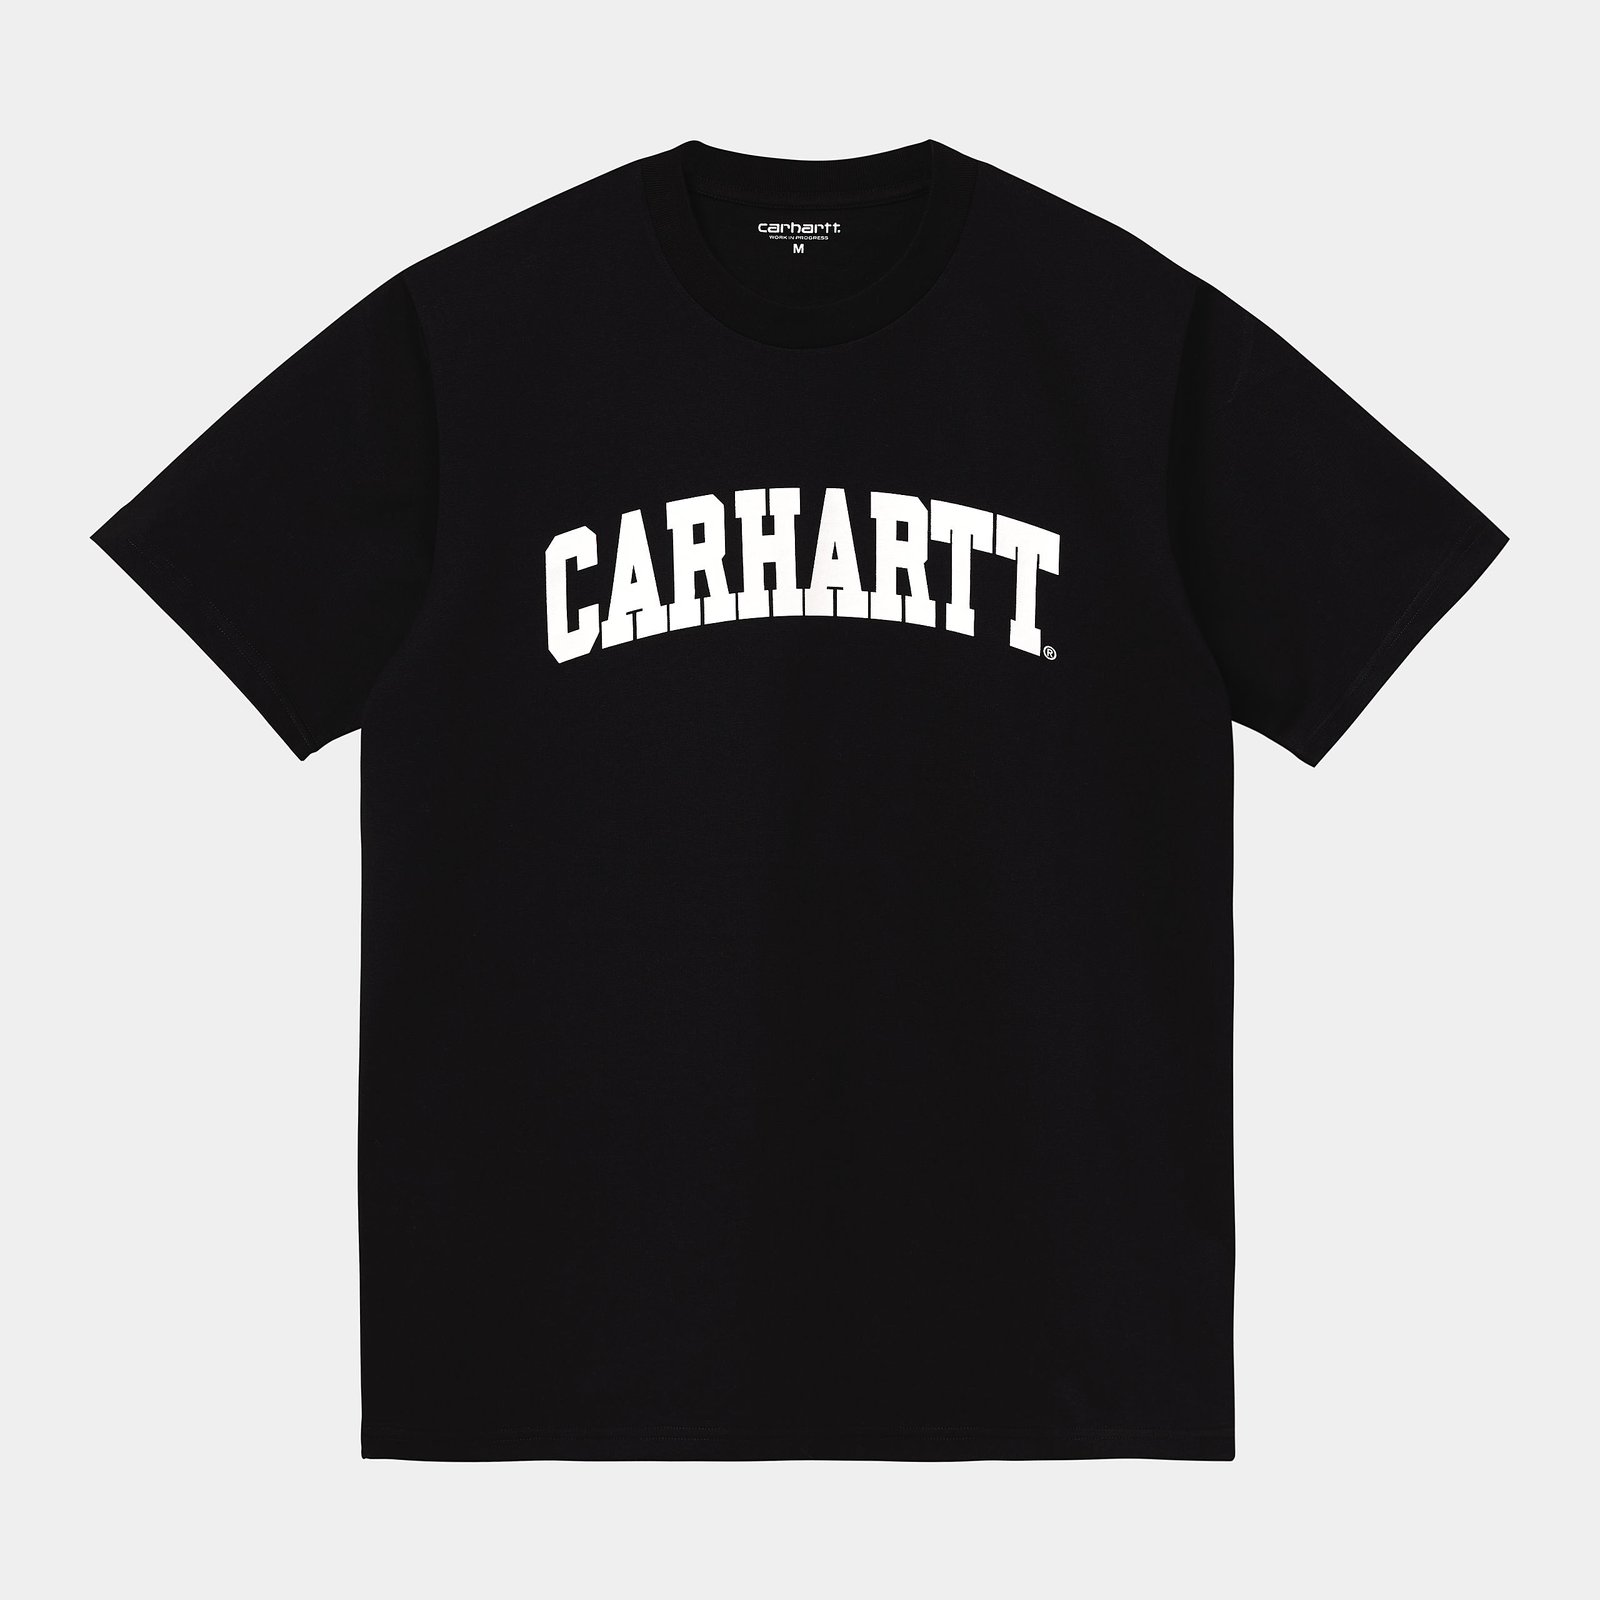 Tried and True: Carhartt's Hoodies for Every Occasion